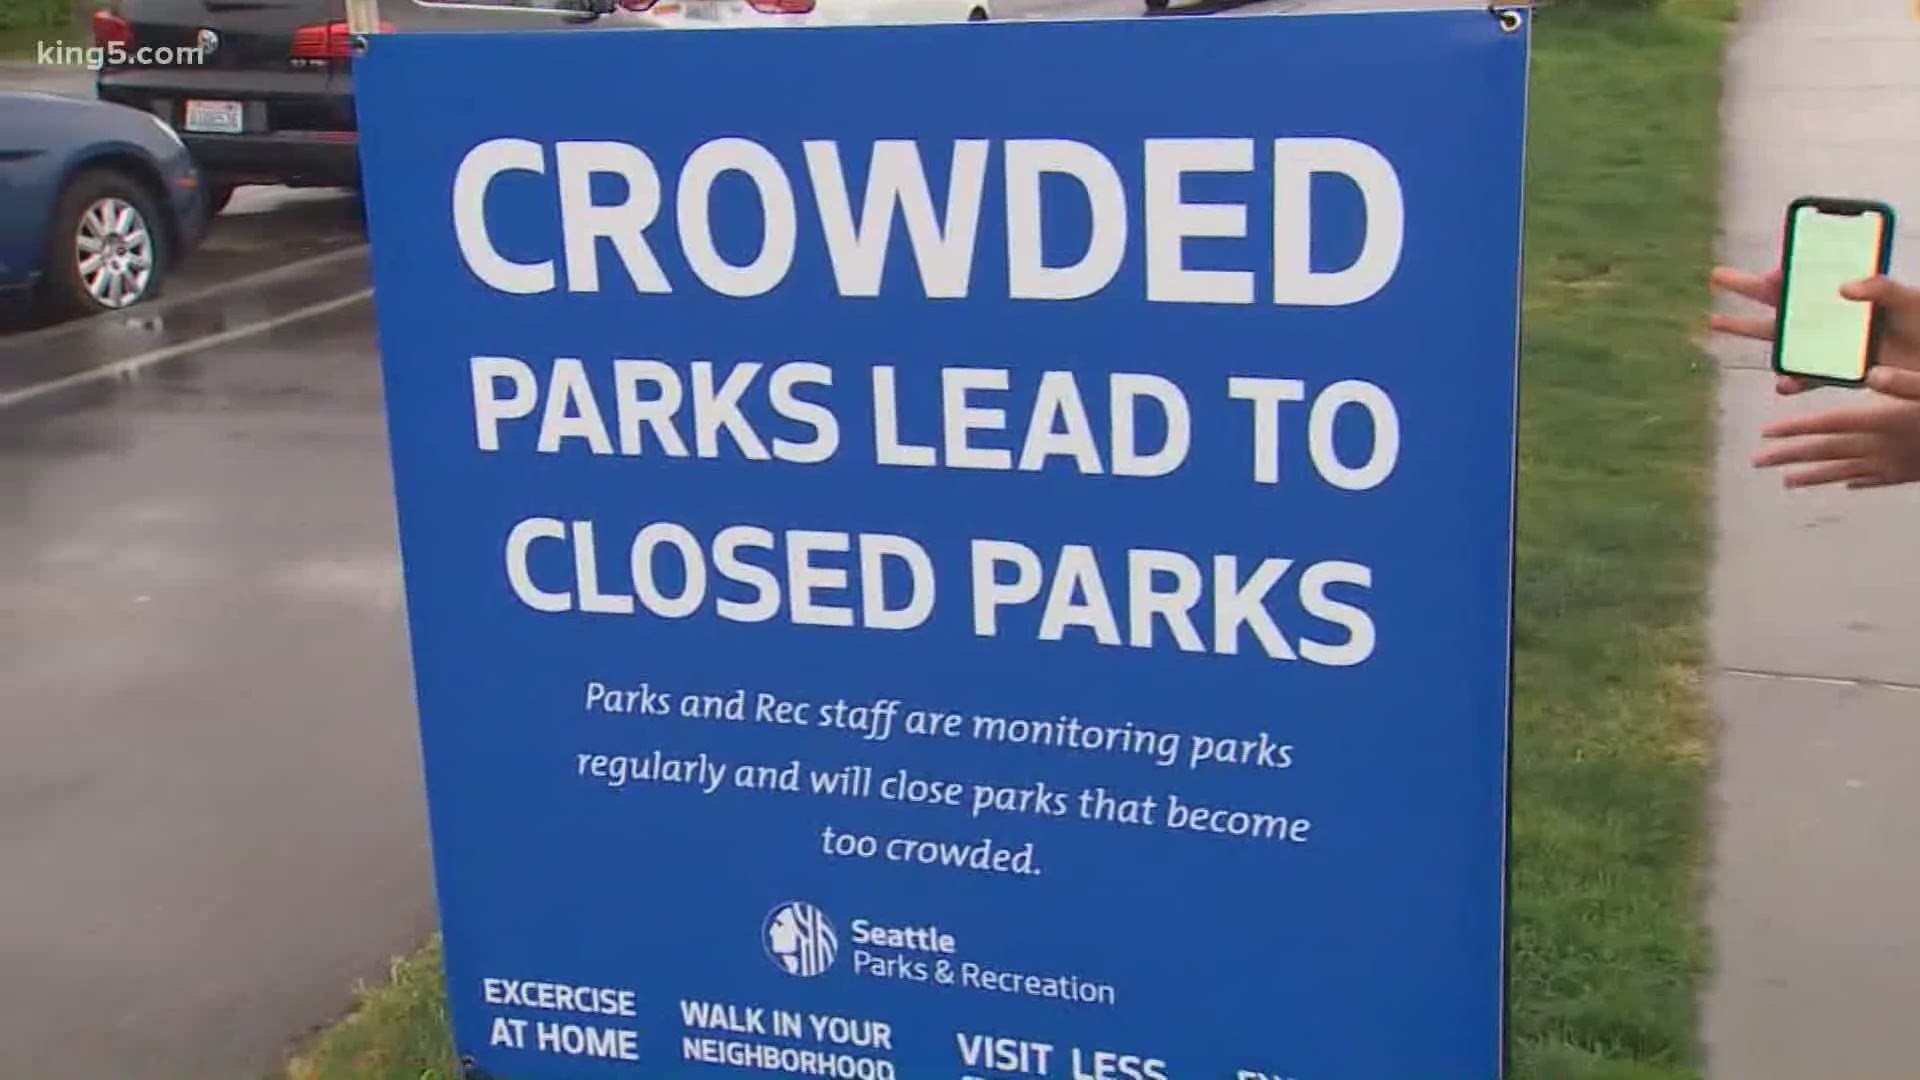 The city of Seattle is rolling out new guidelines for people using the city’s parks, greenways, and farmers markets during the coronavirus pandemic.